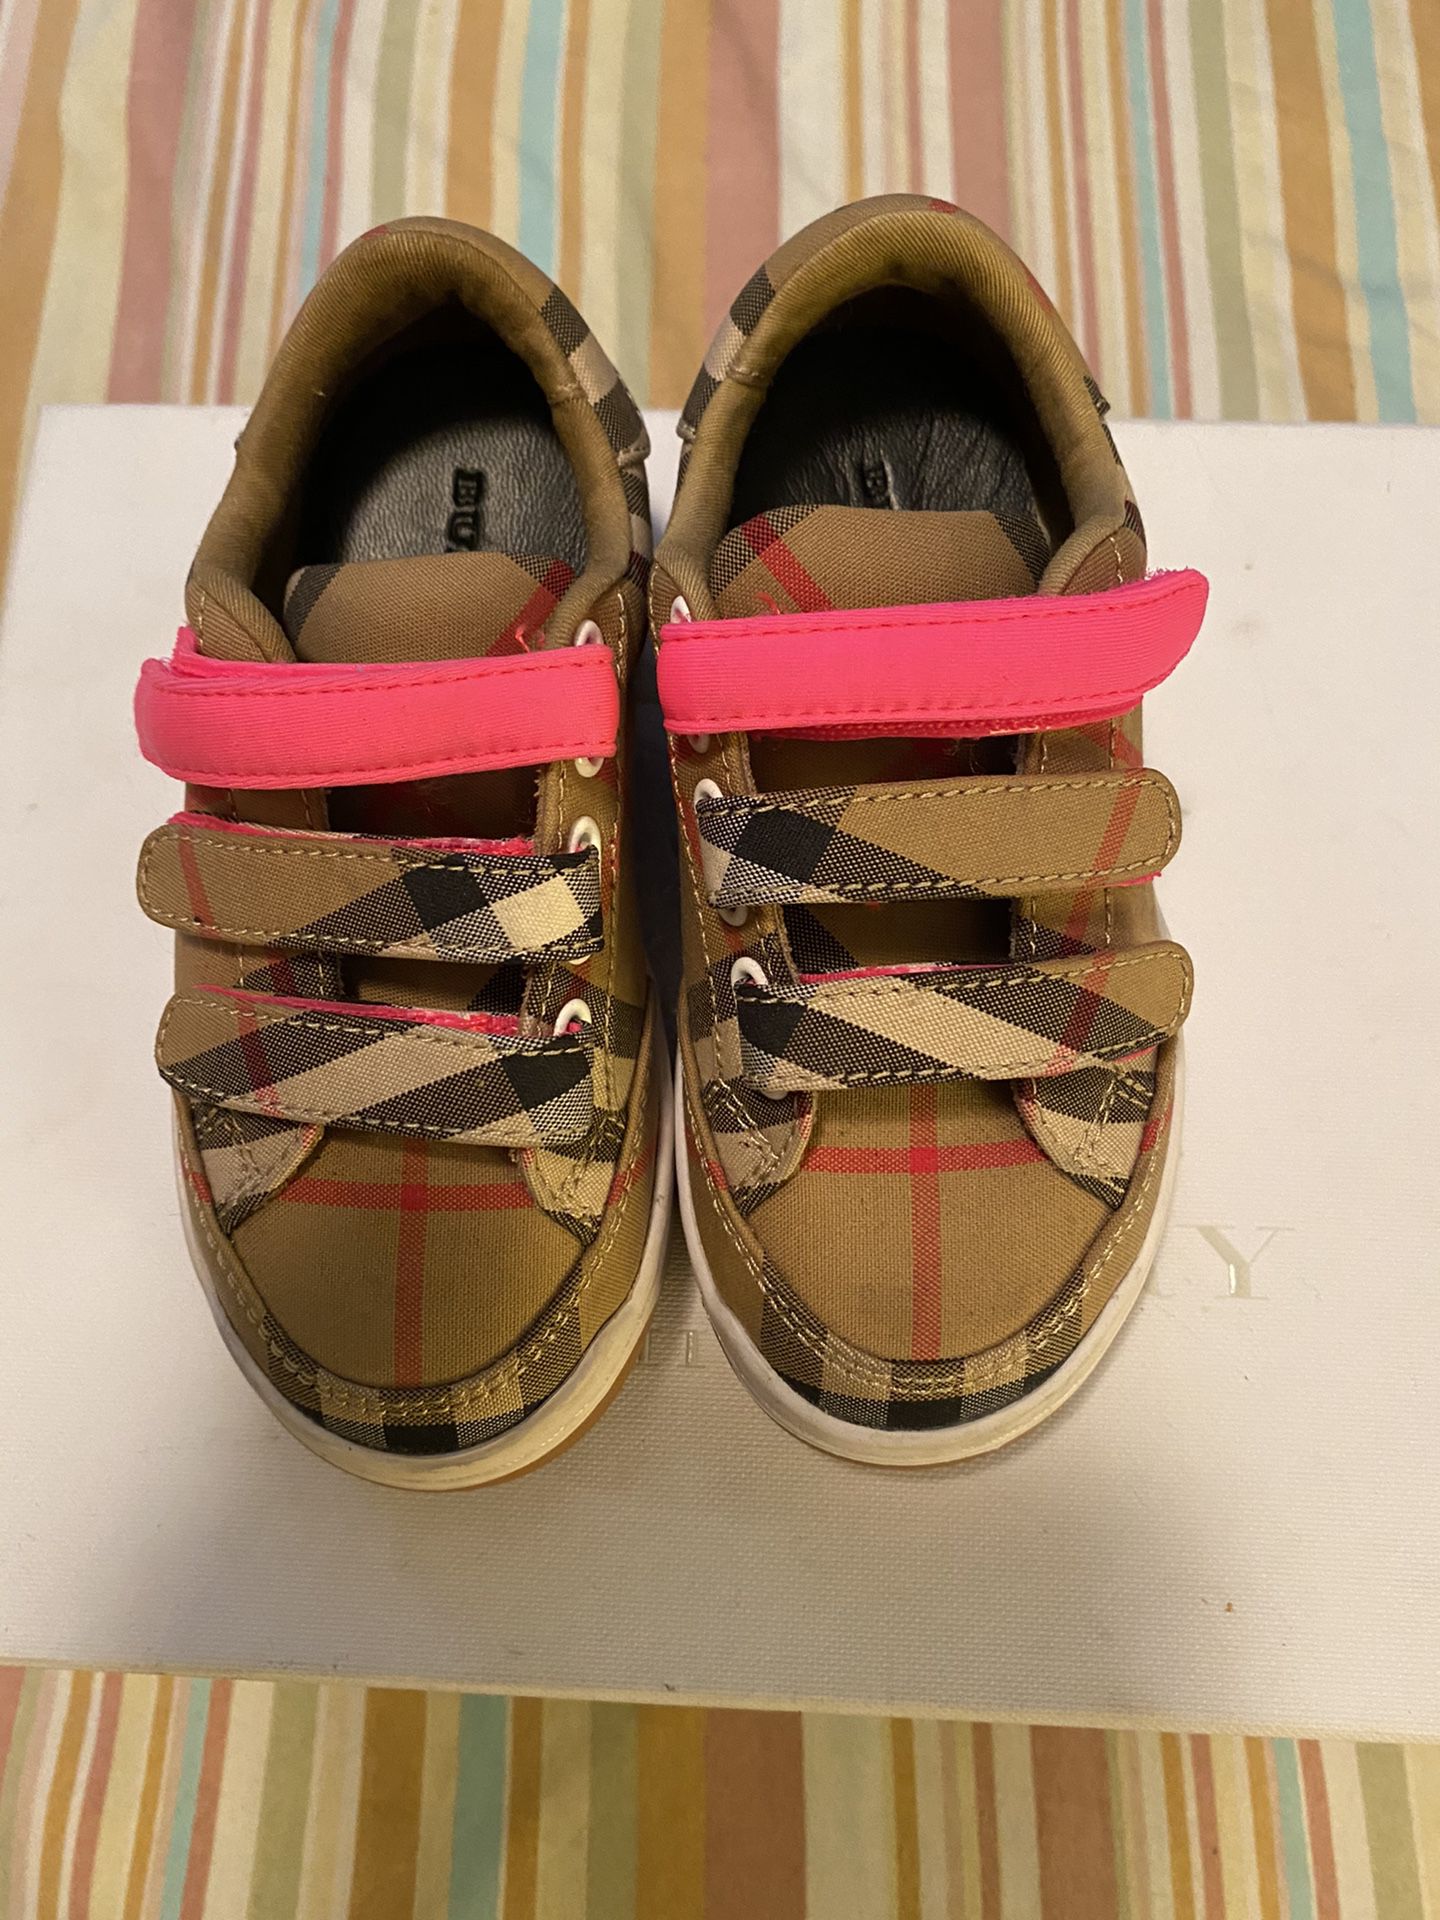 Burberry shoes for girls Size 24